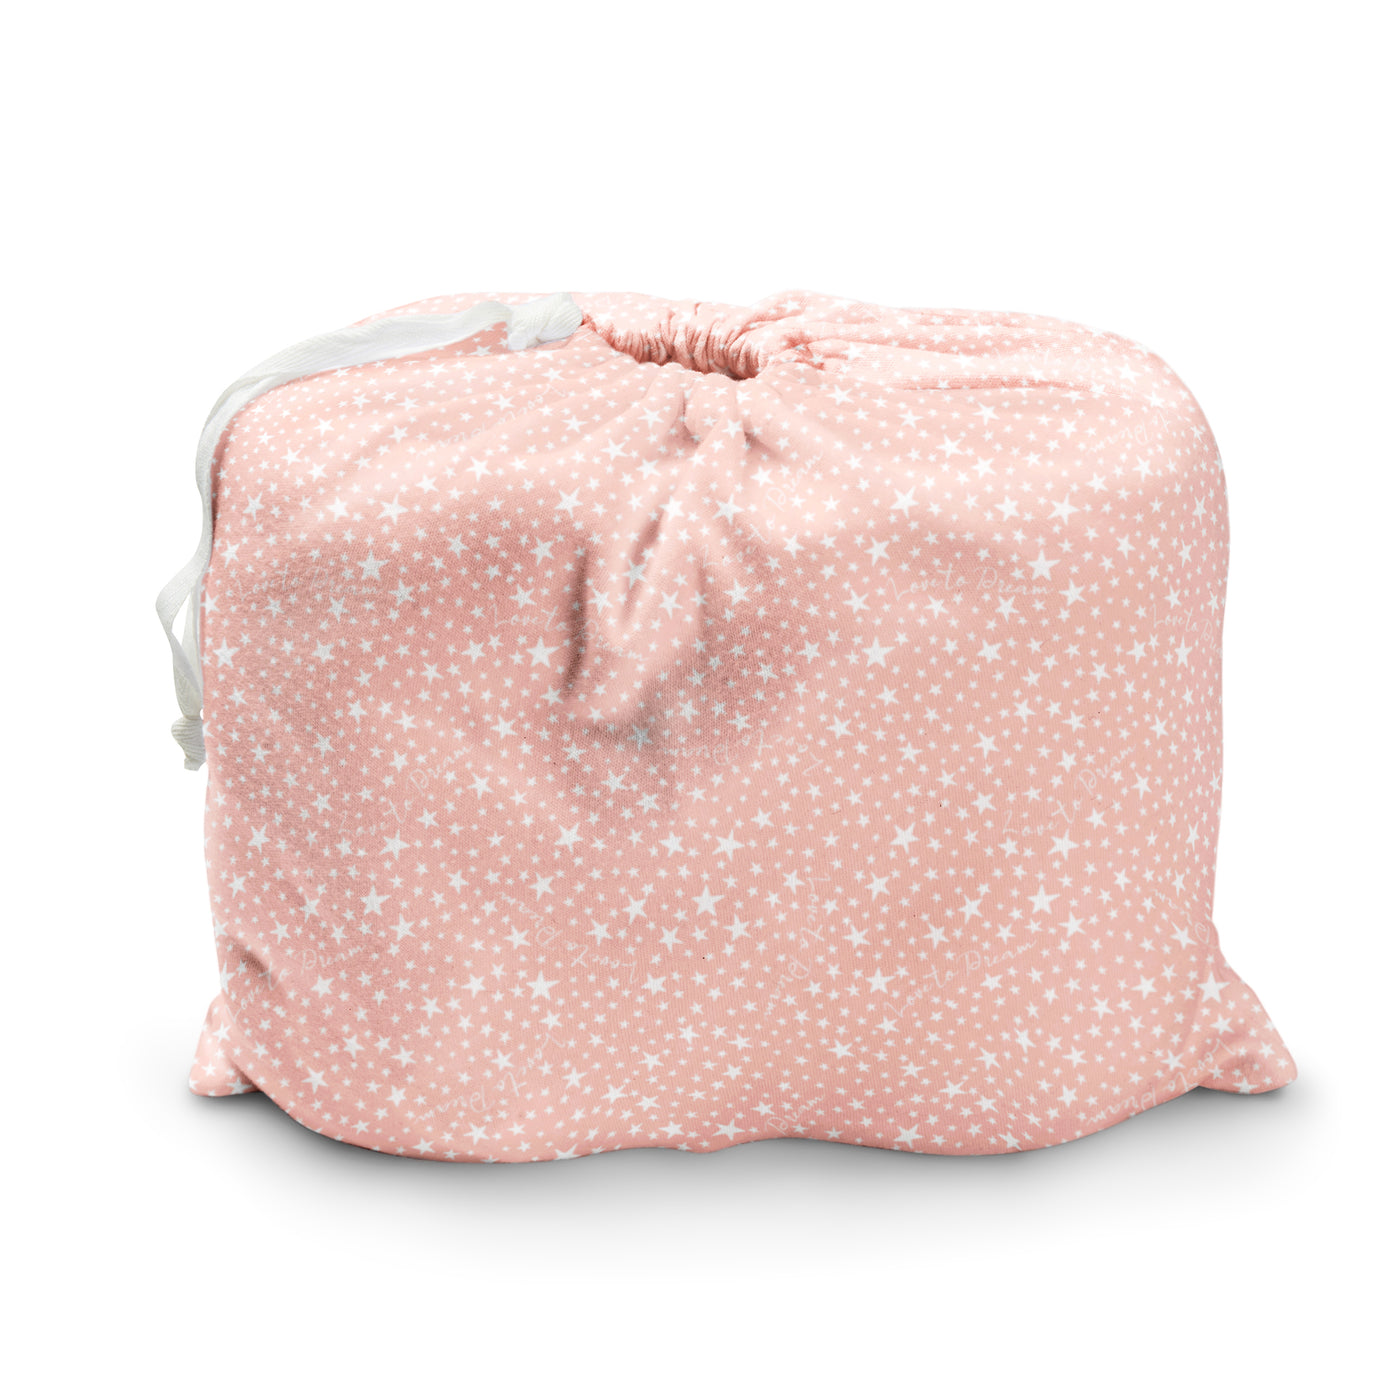 Swaddle & Sheet Bundle - Pink - Love to Dream™ NZ 